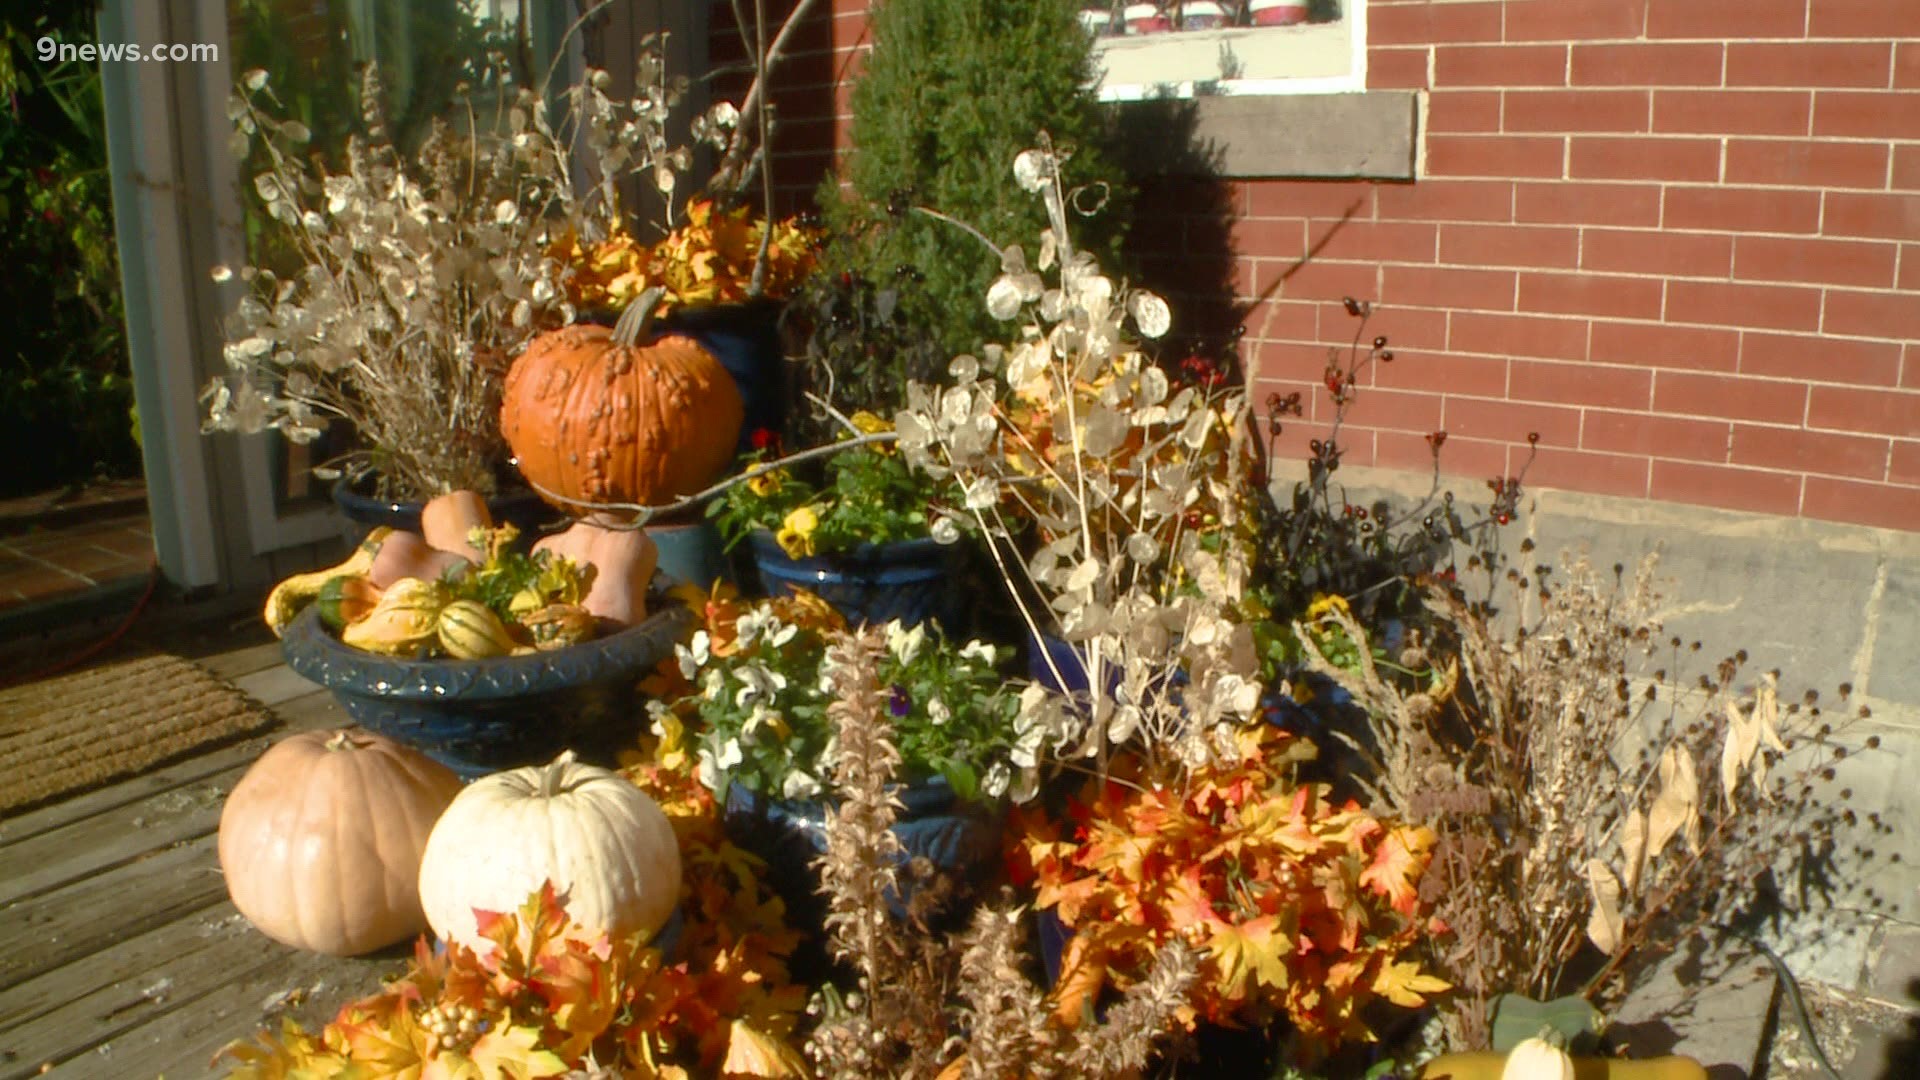 With the removal of dead plants and a couple of additions, your porch can come alive — even in late autumn.